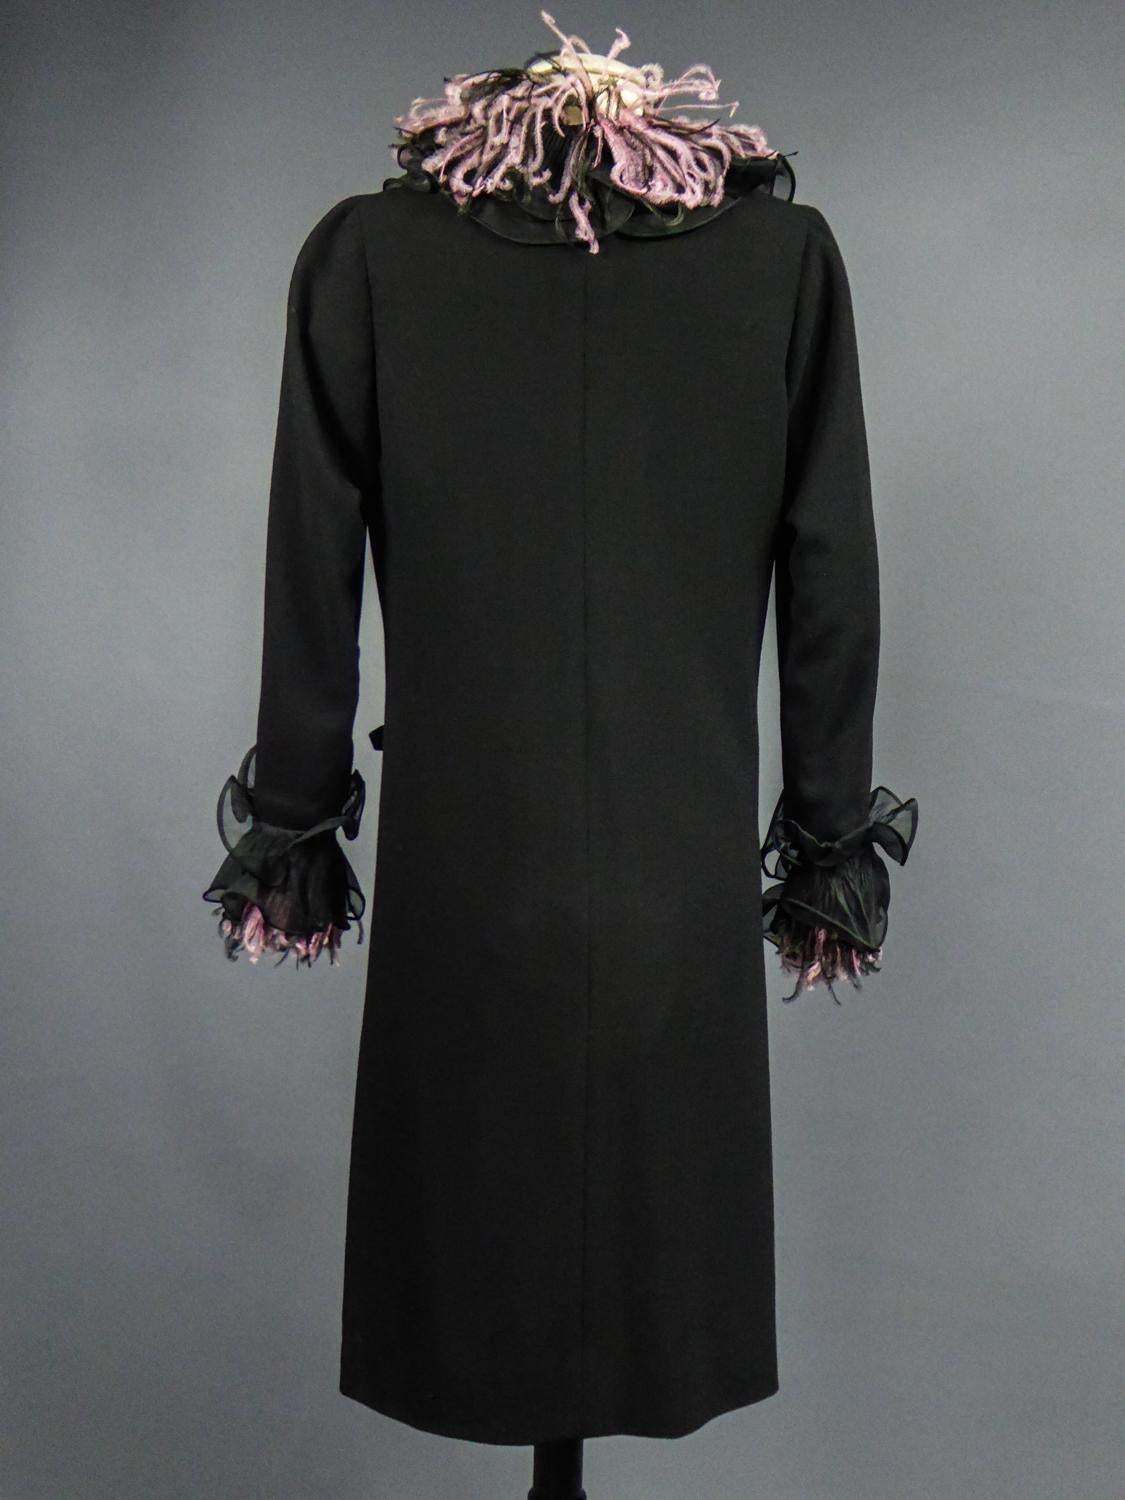 An Yves Saint Laurent Haute Couture Coat Dress Numbered 29390 Circa 1970/1980 For Sale 4